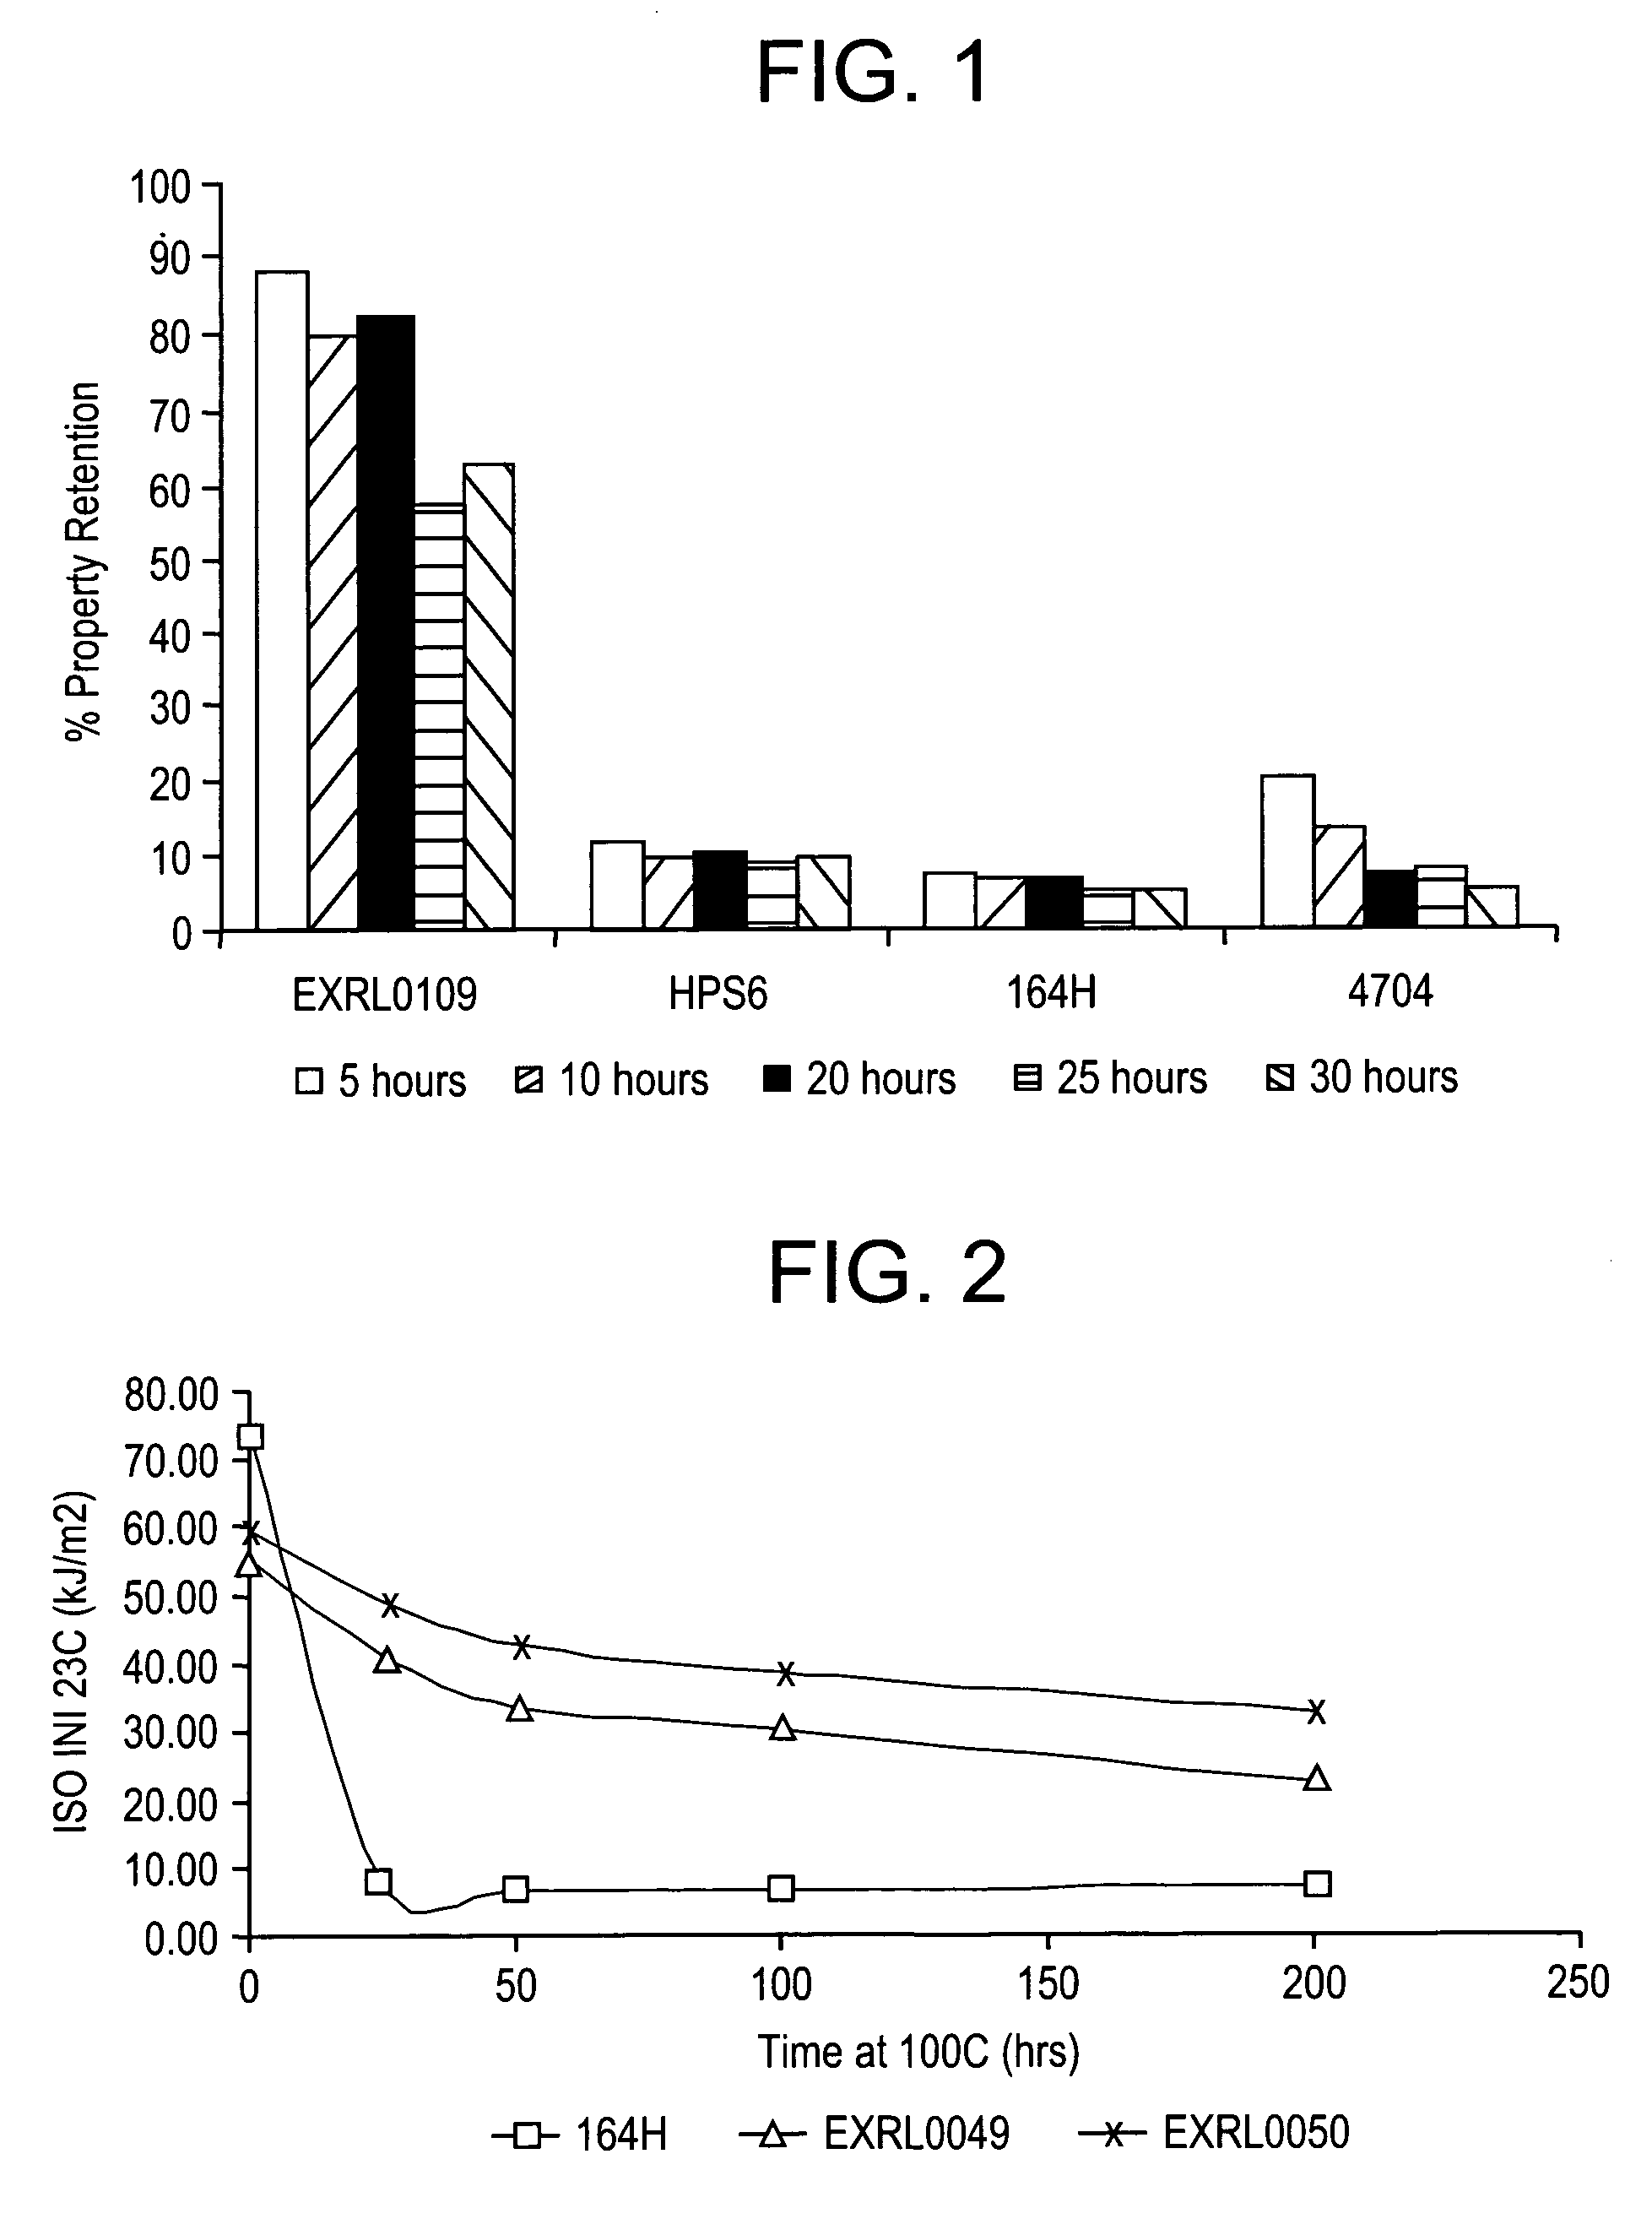 Methods of sterilizing polycarbonate articles and methods of manufacture